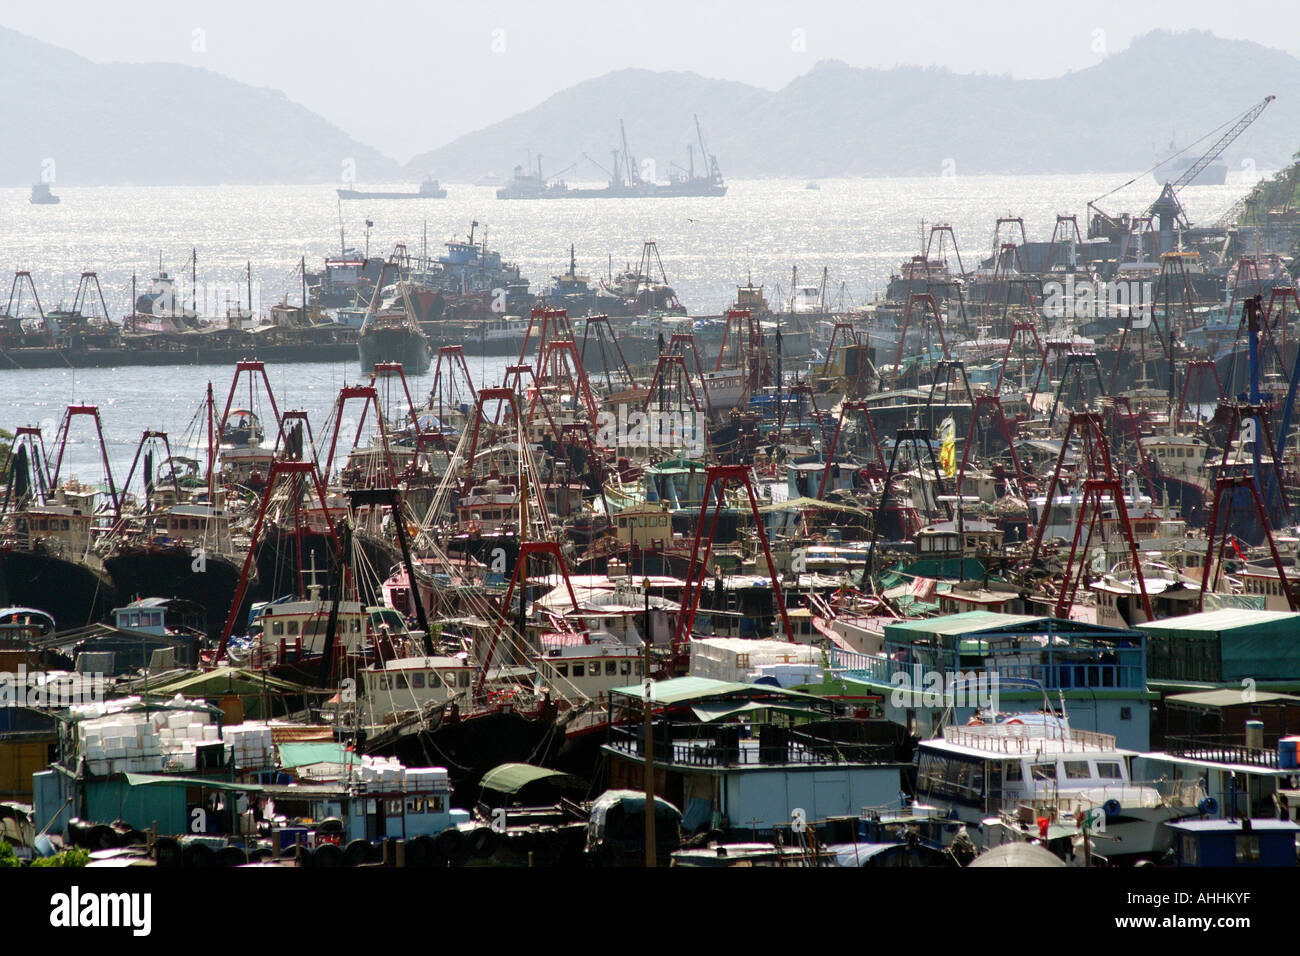 Many Fishing Boats and other Commercial Ships in Aberdeen, Hong Kong, China Stock Photo